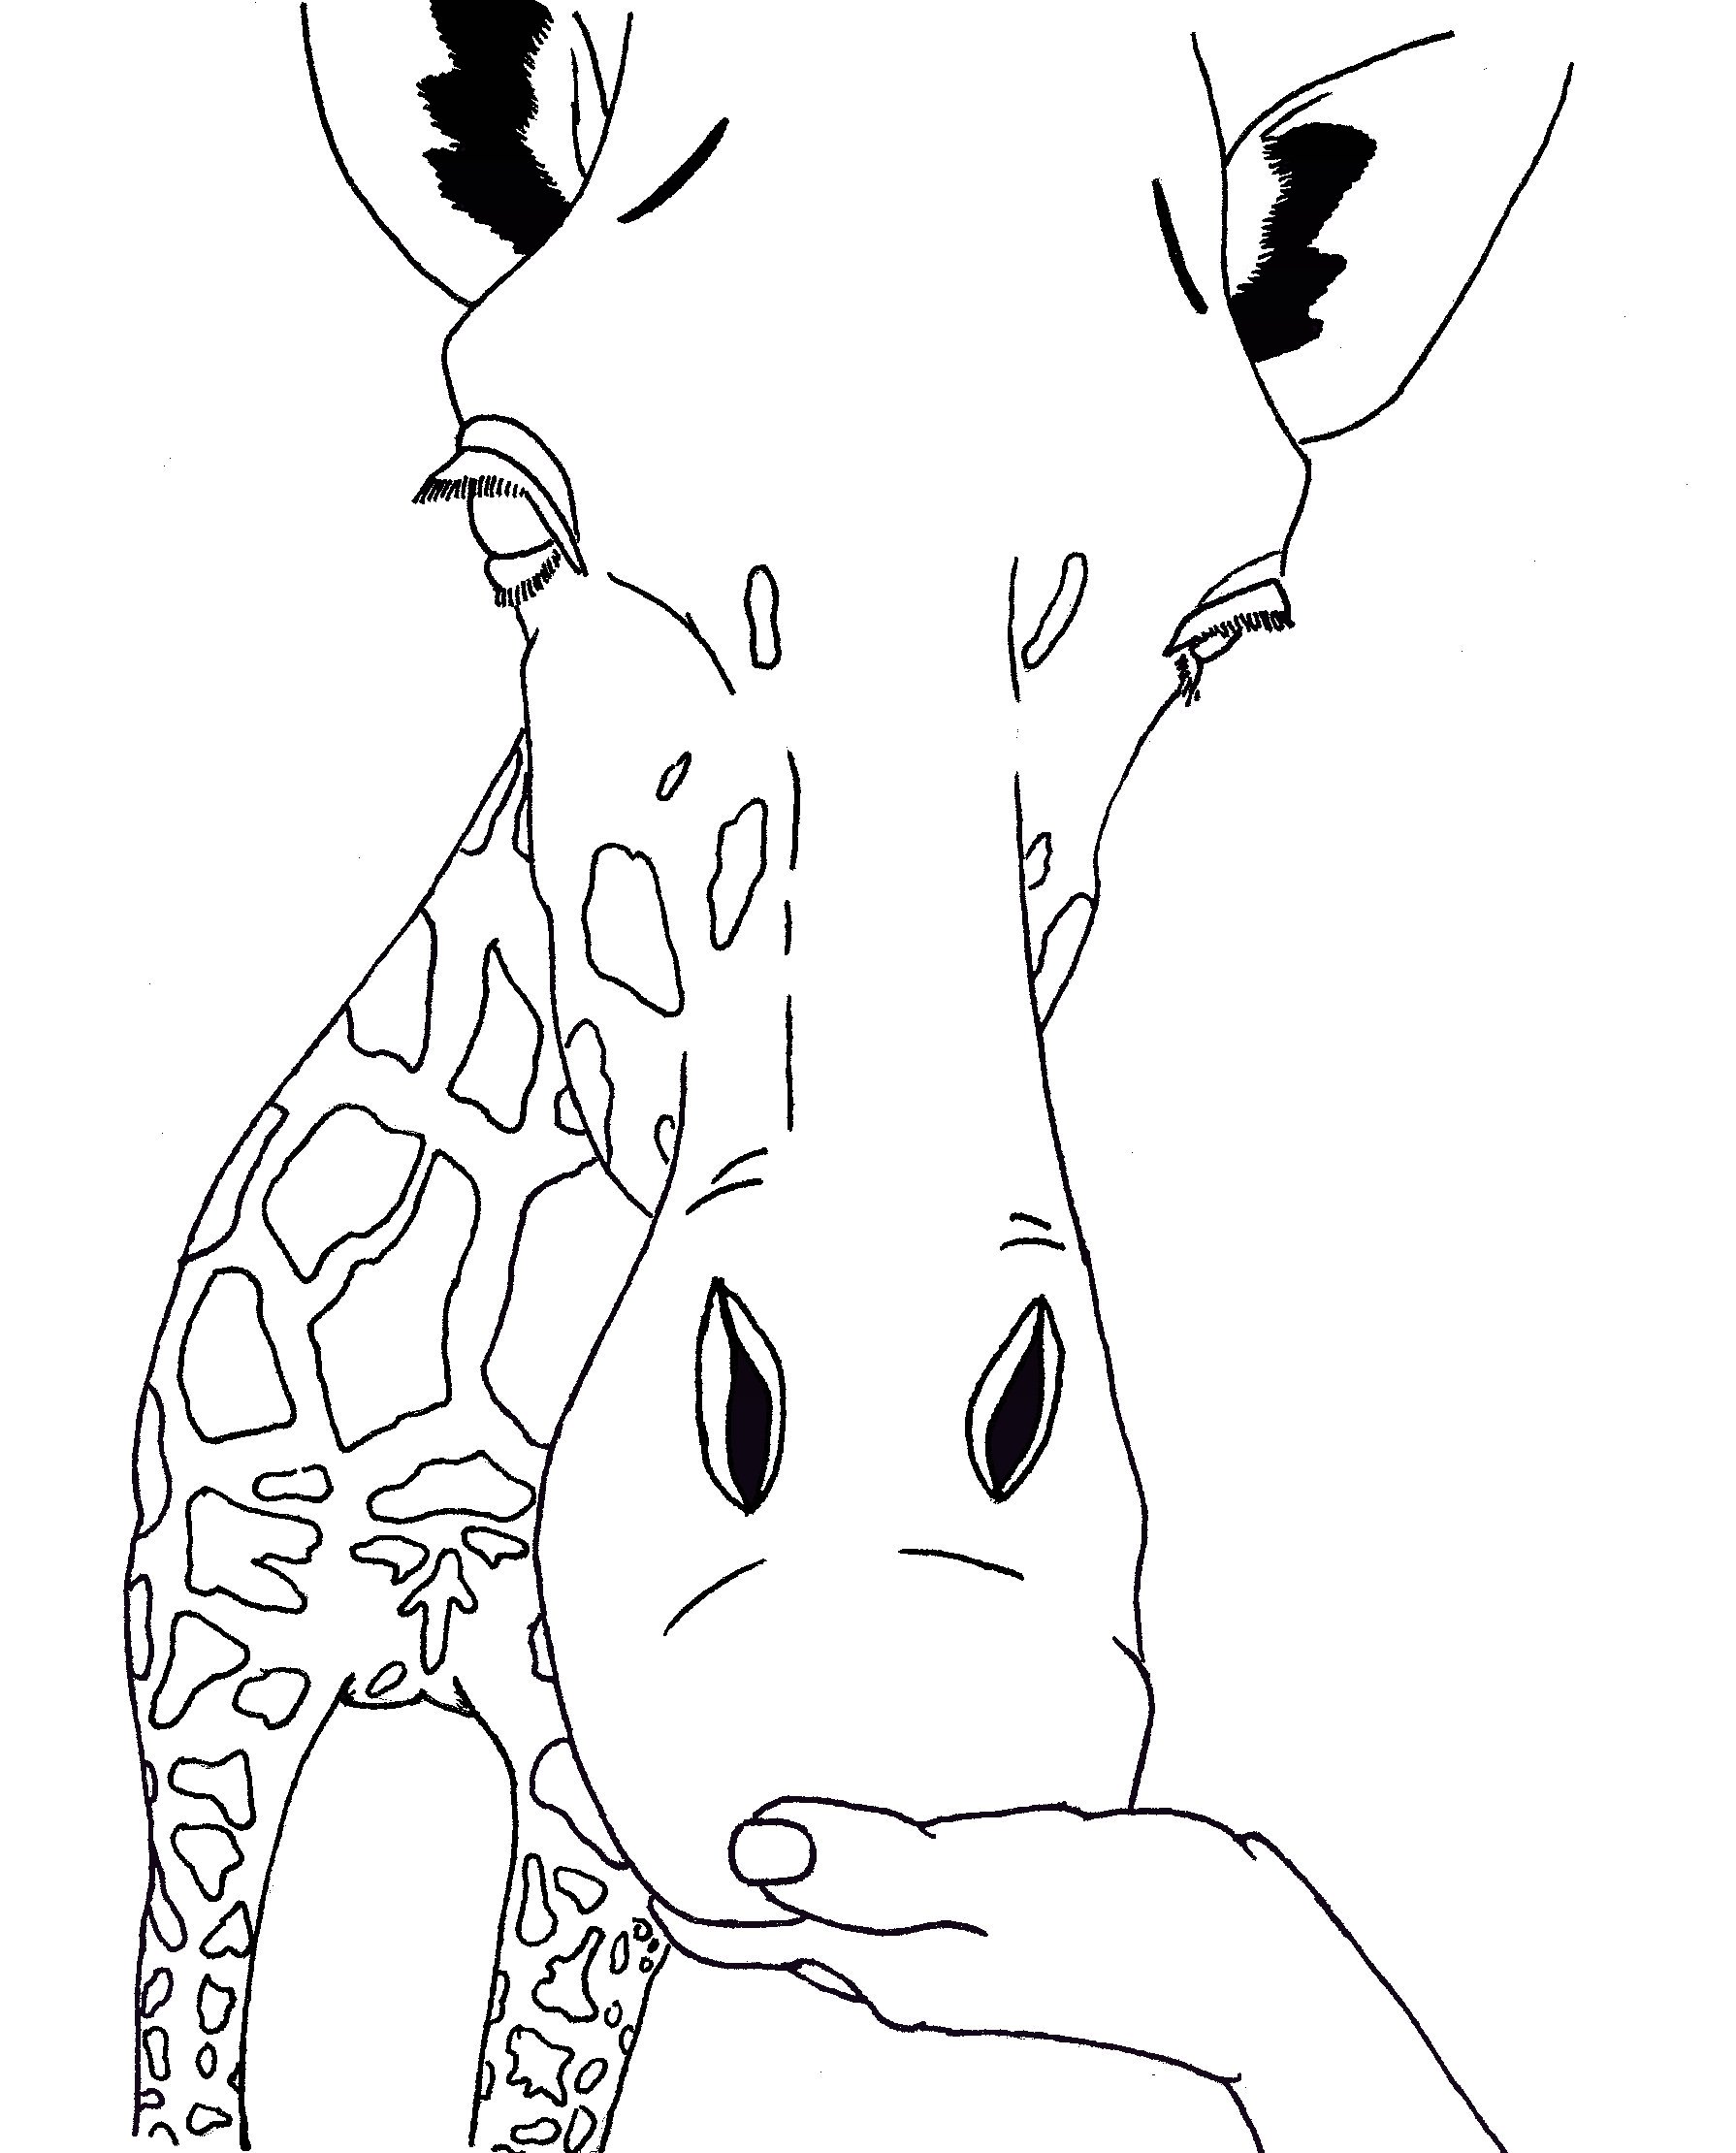 Coloring Page of Giraffe Face Coloring Page